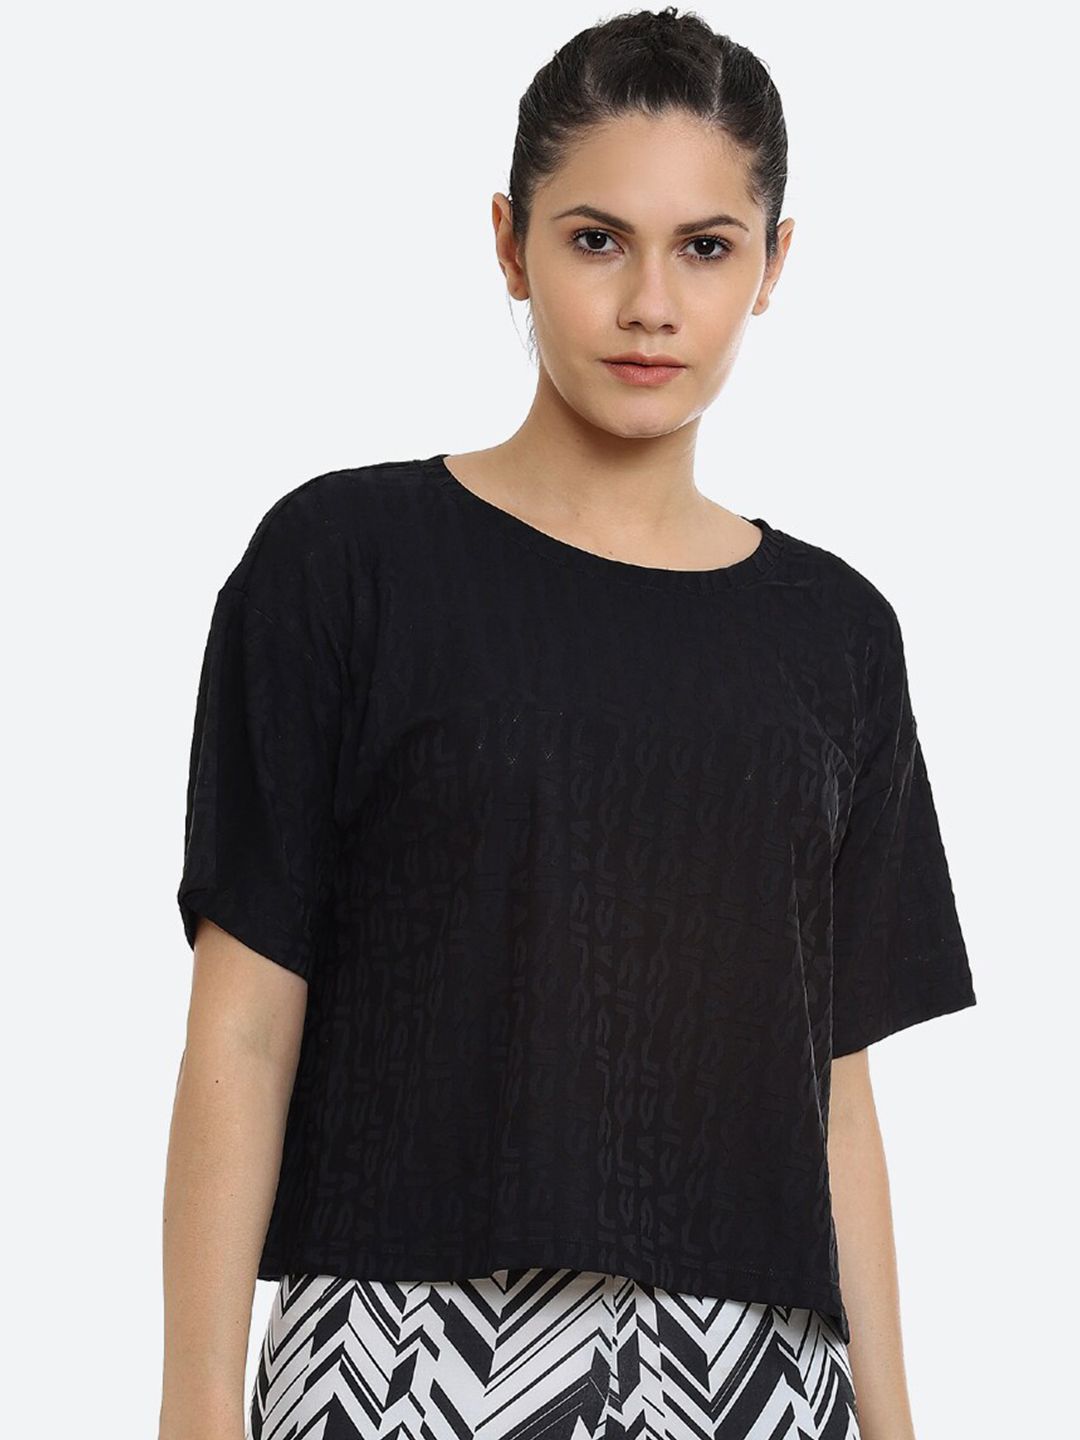 ASICS Women Black Printed Extended Sleeves Raw Edge Training T-shirt W CROPPED LOGO JACQUARD SS Price in India